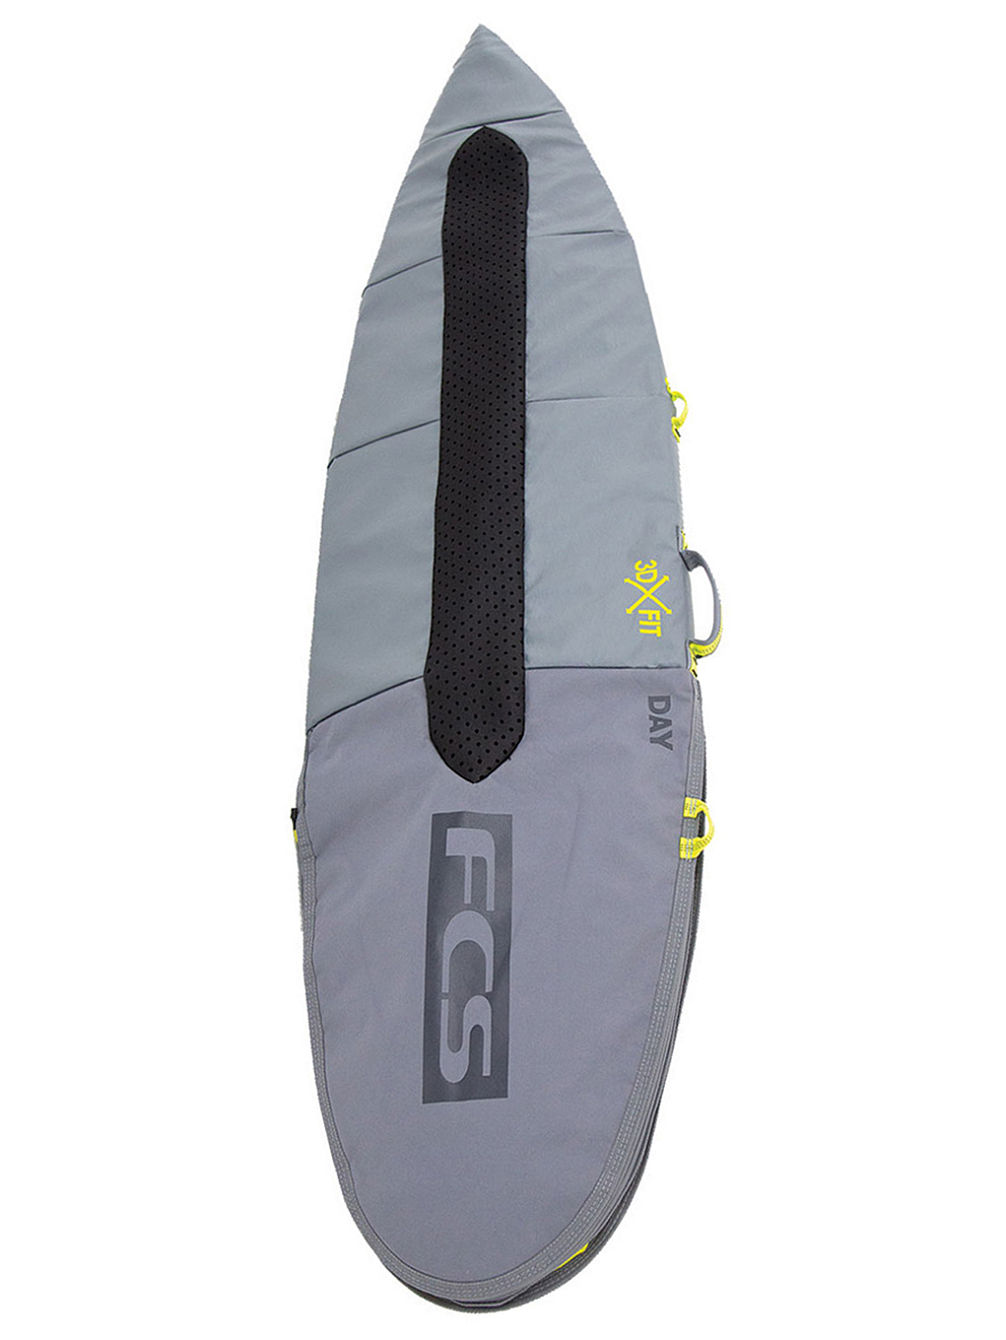 Day All Purpose 5&amp;#039;9 Surfboard Bag